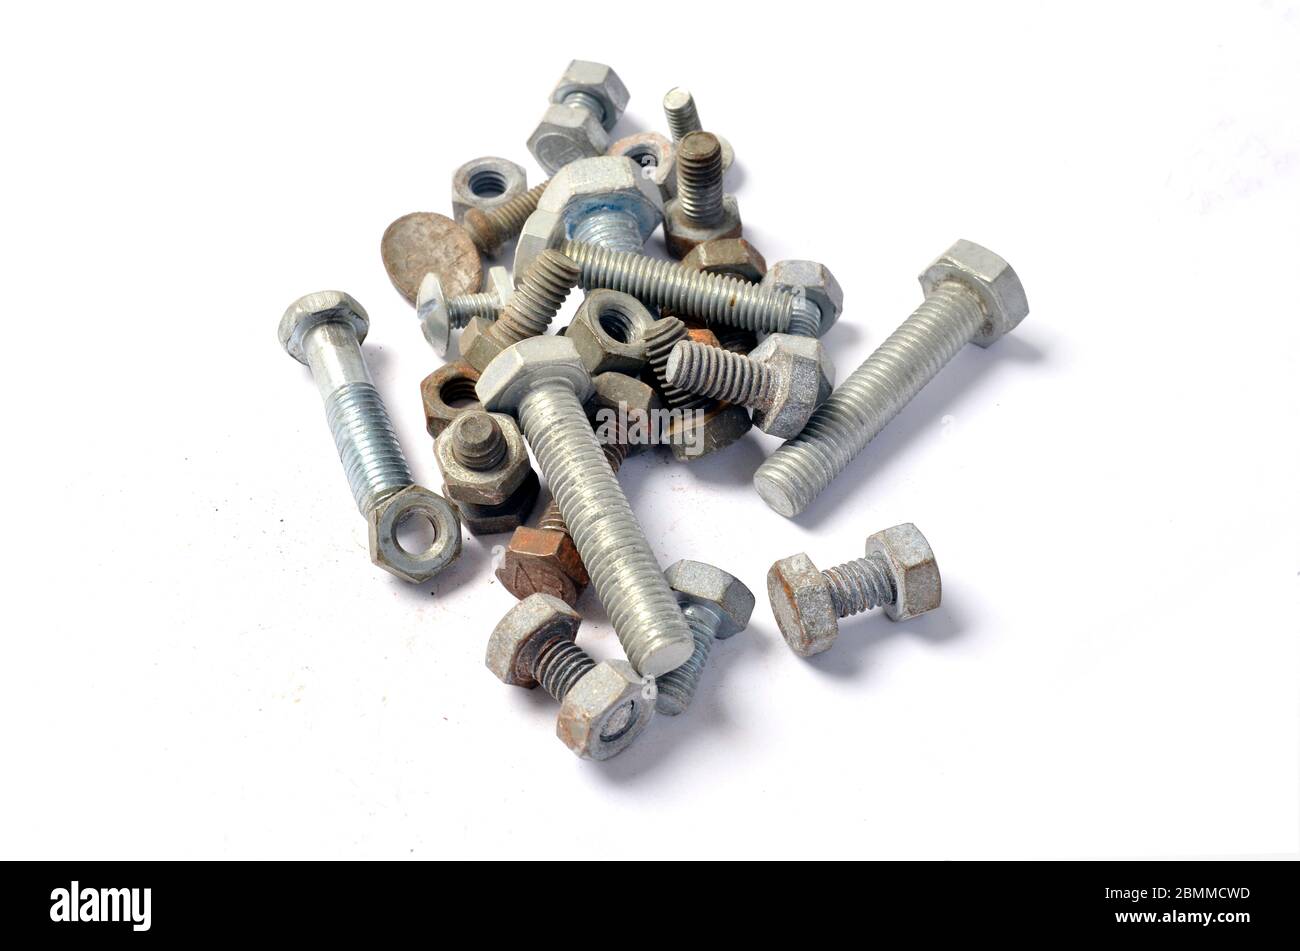 Pile of loose nuts & bolts on white. Stock Photo